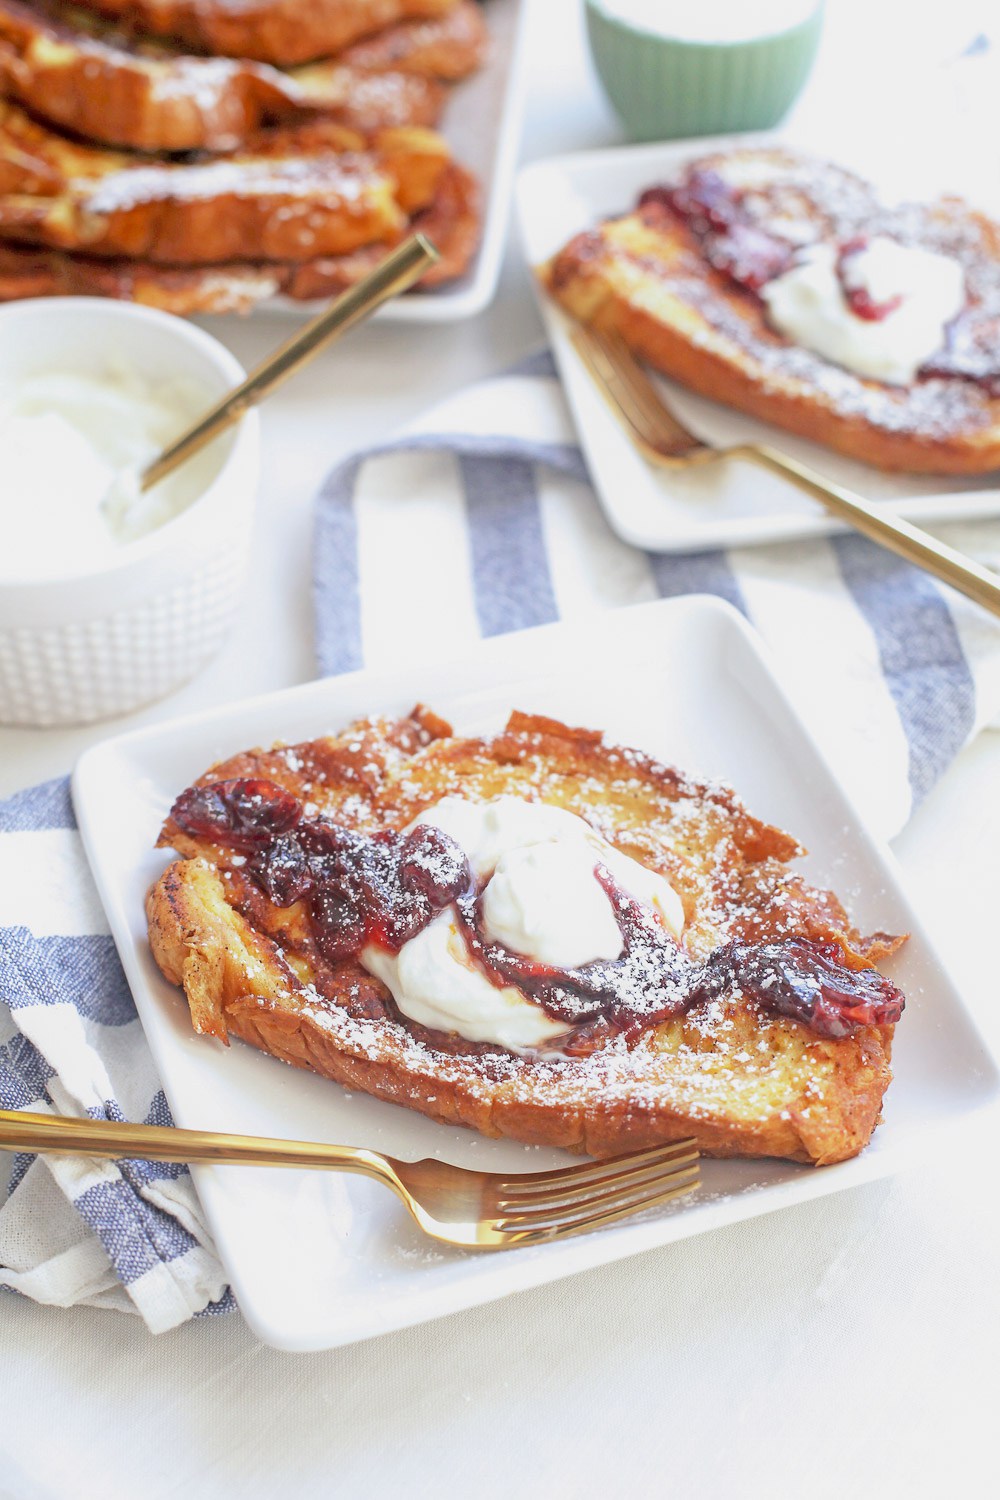 Whipped Ricotta Topped French Toast with Boozy Blood Orange Compote